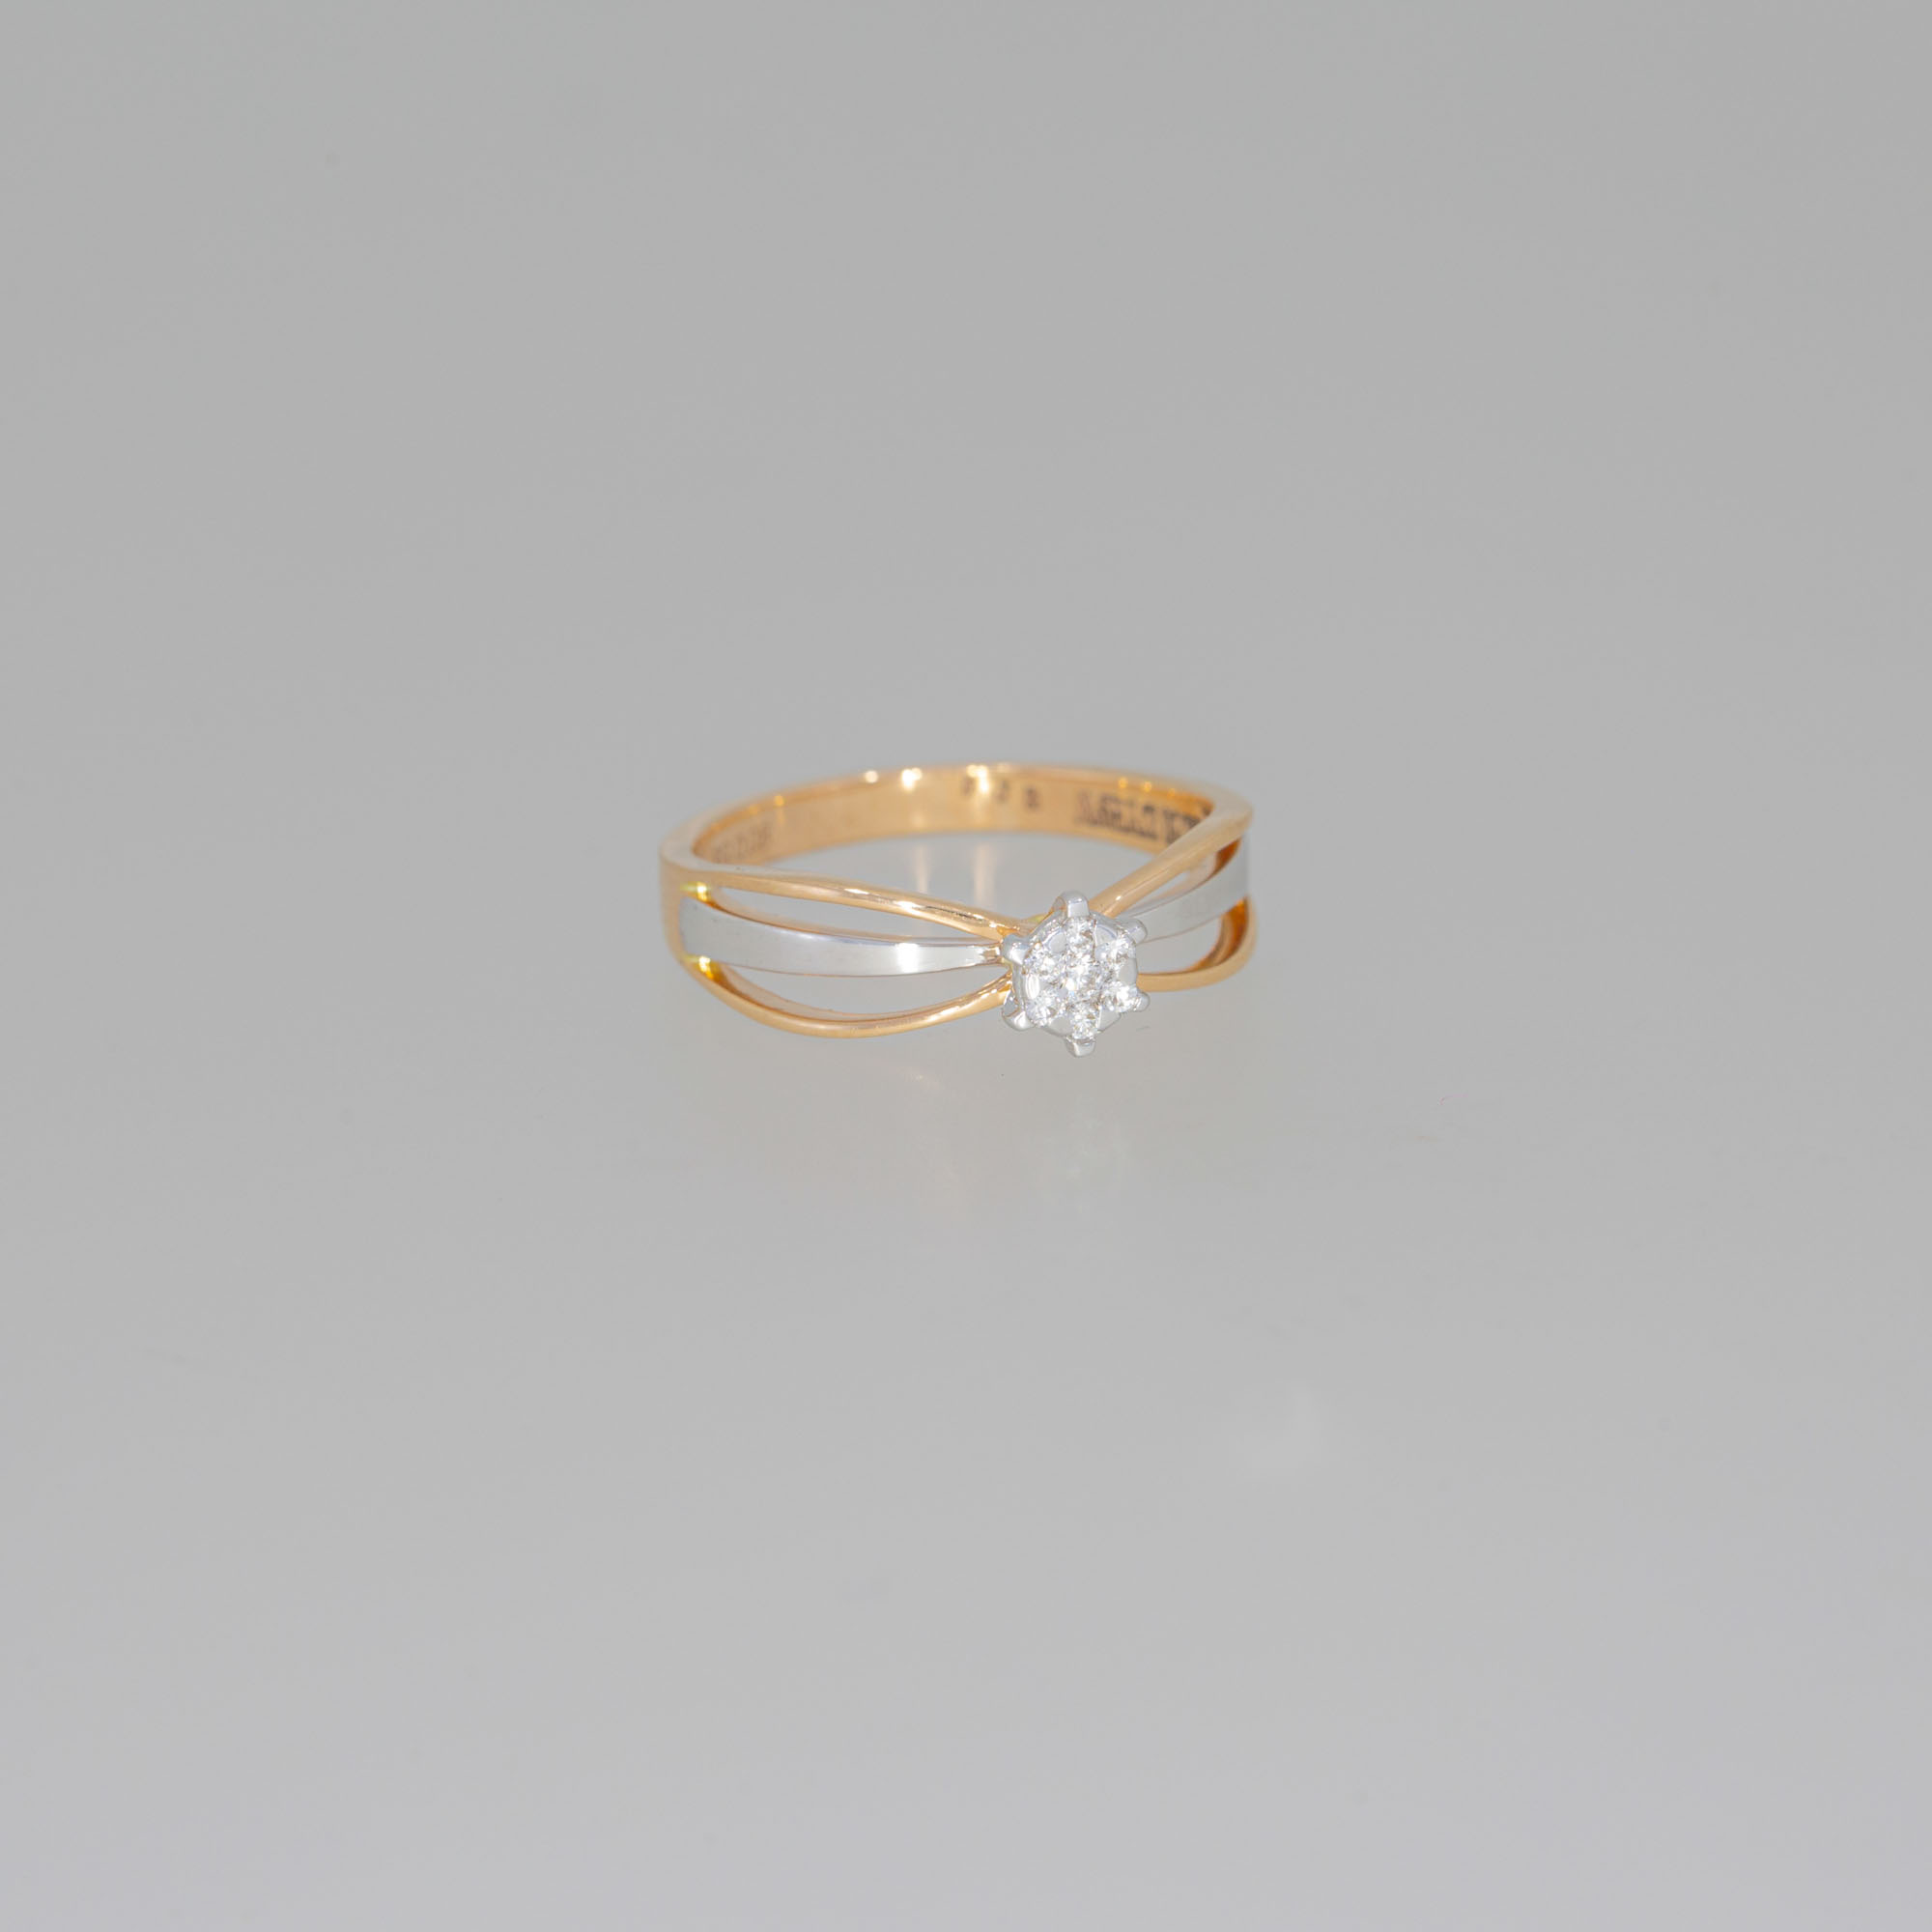 The Blooming Rose Adjustable Gold Ring